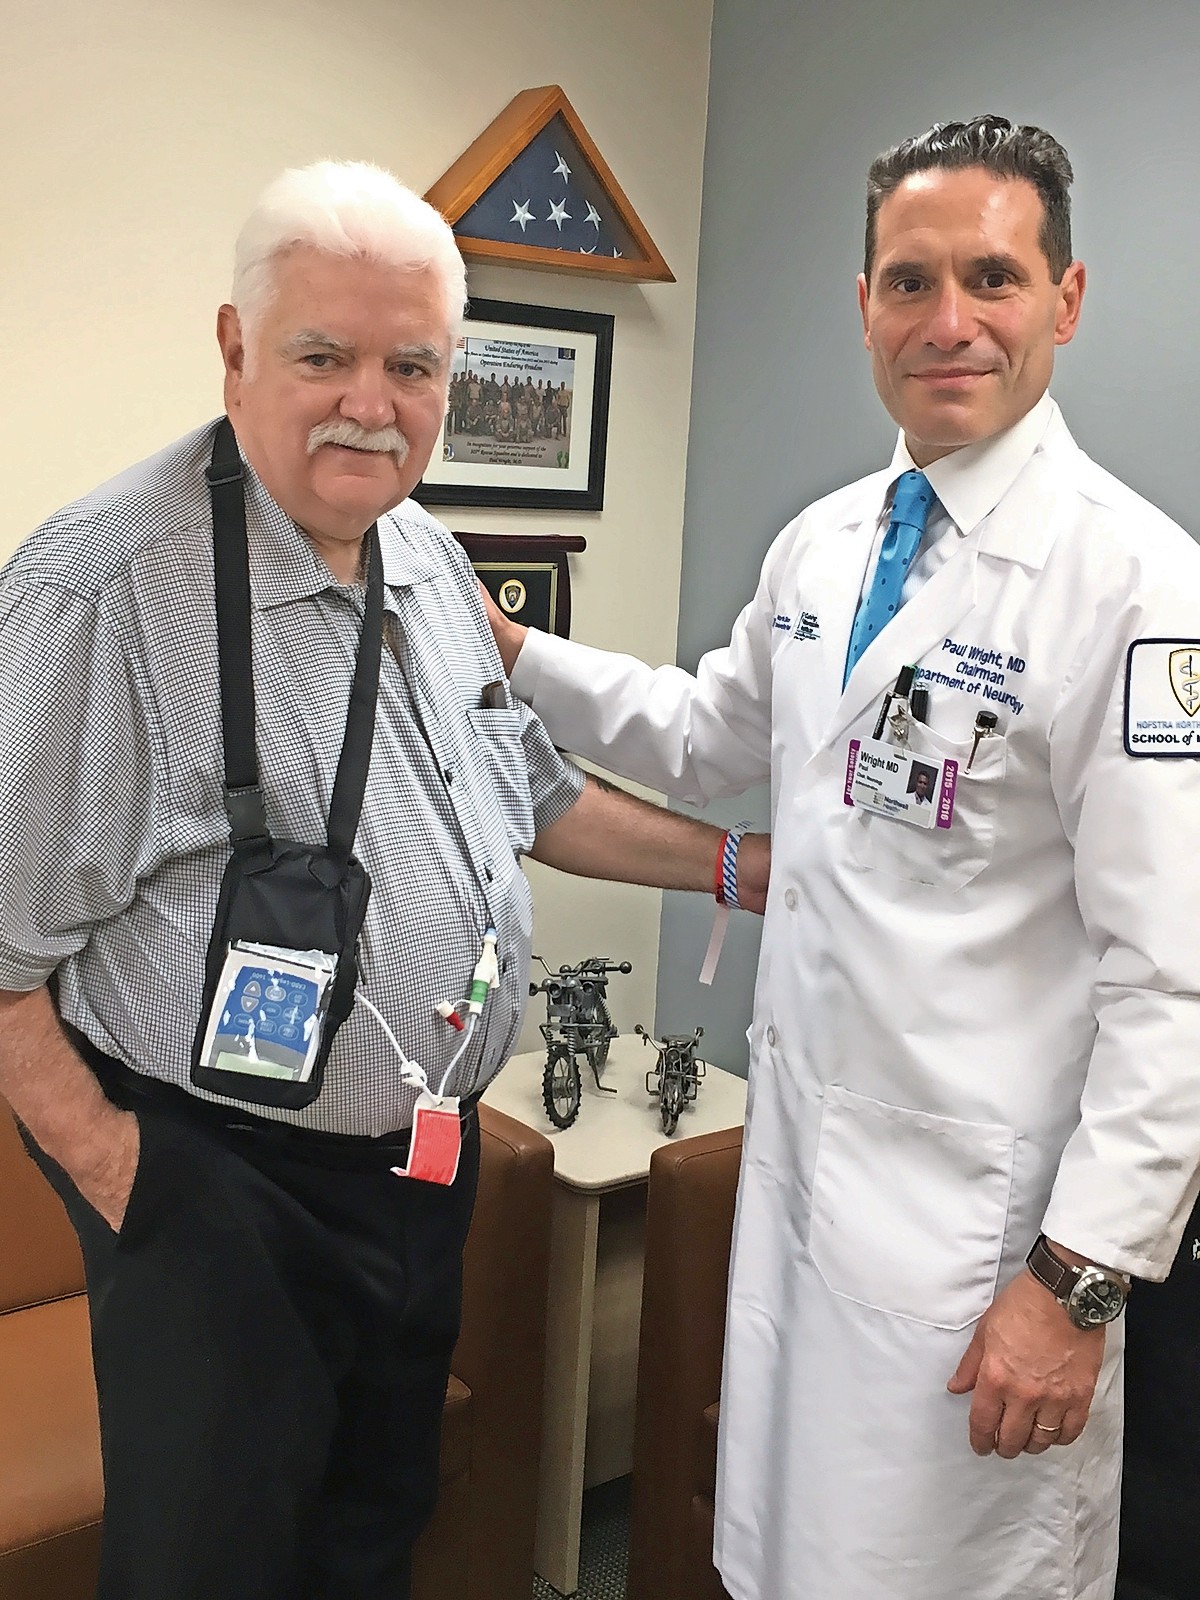 Former RVCPD Commissioner Jack McKeon, left, was one of the first people on Long Island to receive a new treatment for Parkinson’s Disease. Doctors Jaydeep Kadam and Kostas Sideridis, from Northwell Health's gastroenterology unit, performed the quick surgery to install a medication pump, which allows McKeon to live tremor-free for up to 16 hours a day. He's pictured here with his neurologist, Dr. Paul Wright.